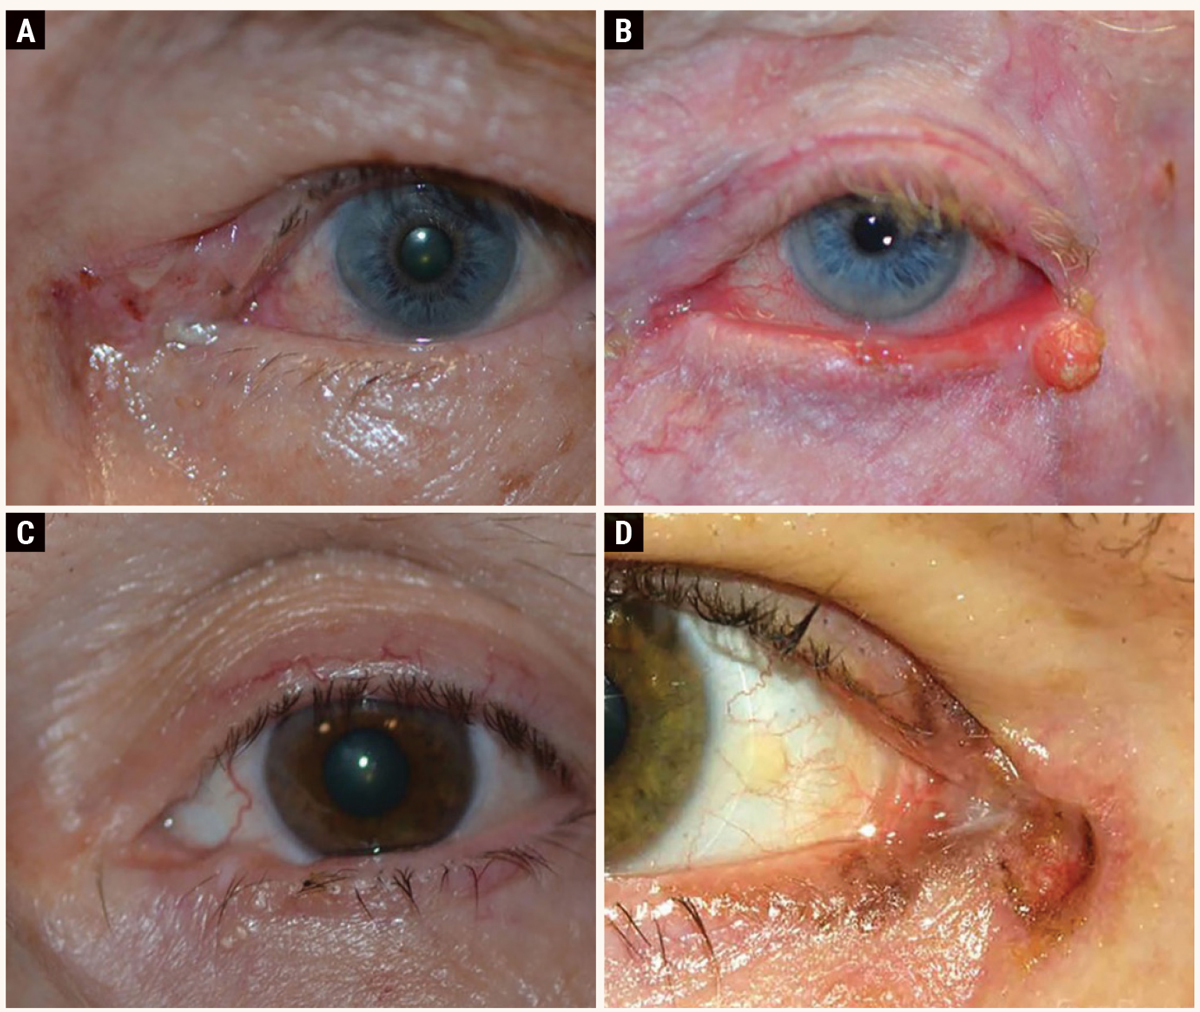 This series shows the range of potential eyelid carcinomas: (A) basal cell carcinoma, (B) nodular squamous cell carcinoma, (C) sebaceous cell carcinoma and (D) melanoma.